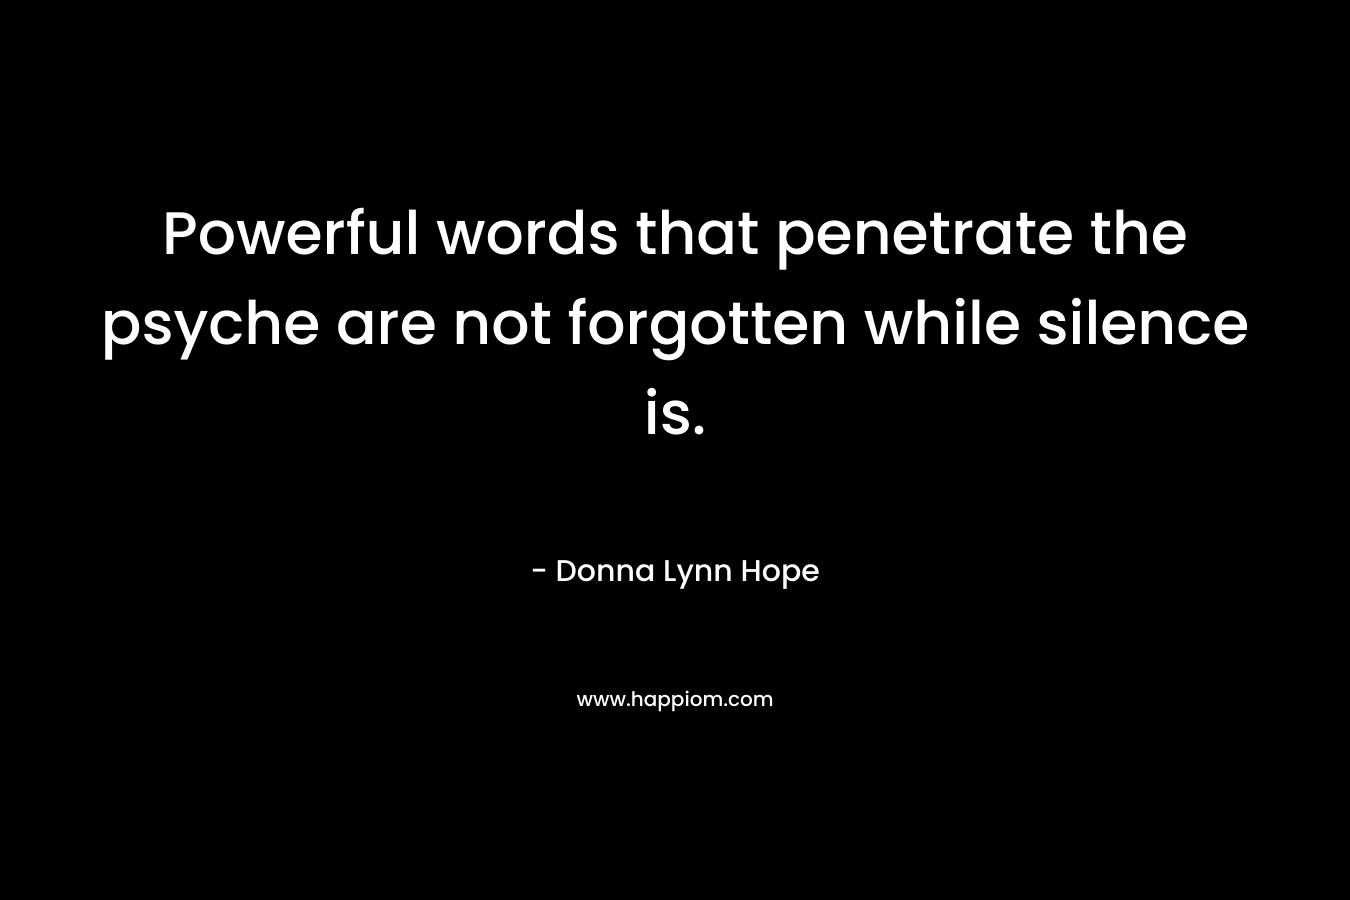 Powerful words that penetrate the psyche are not forgotten while silence is.